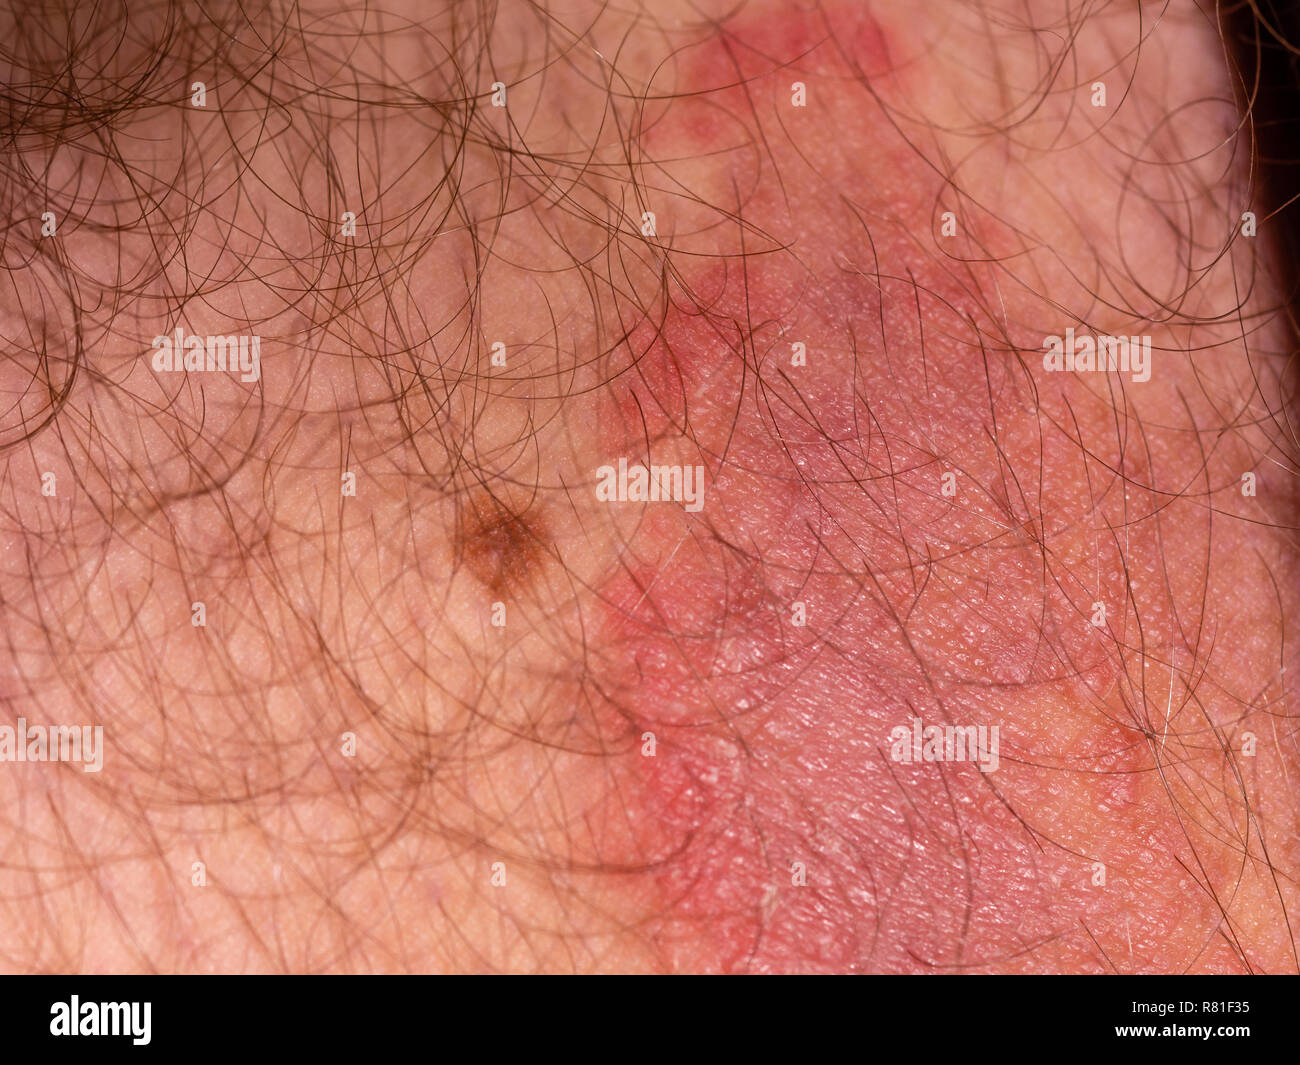 Fungal skin infection on male thigh Stock Photo